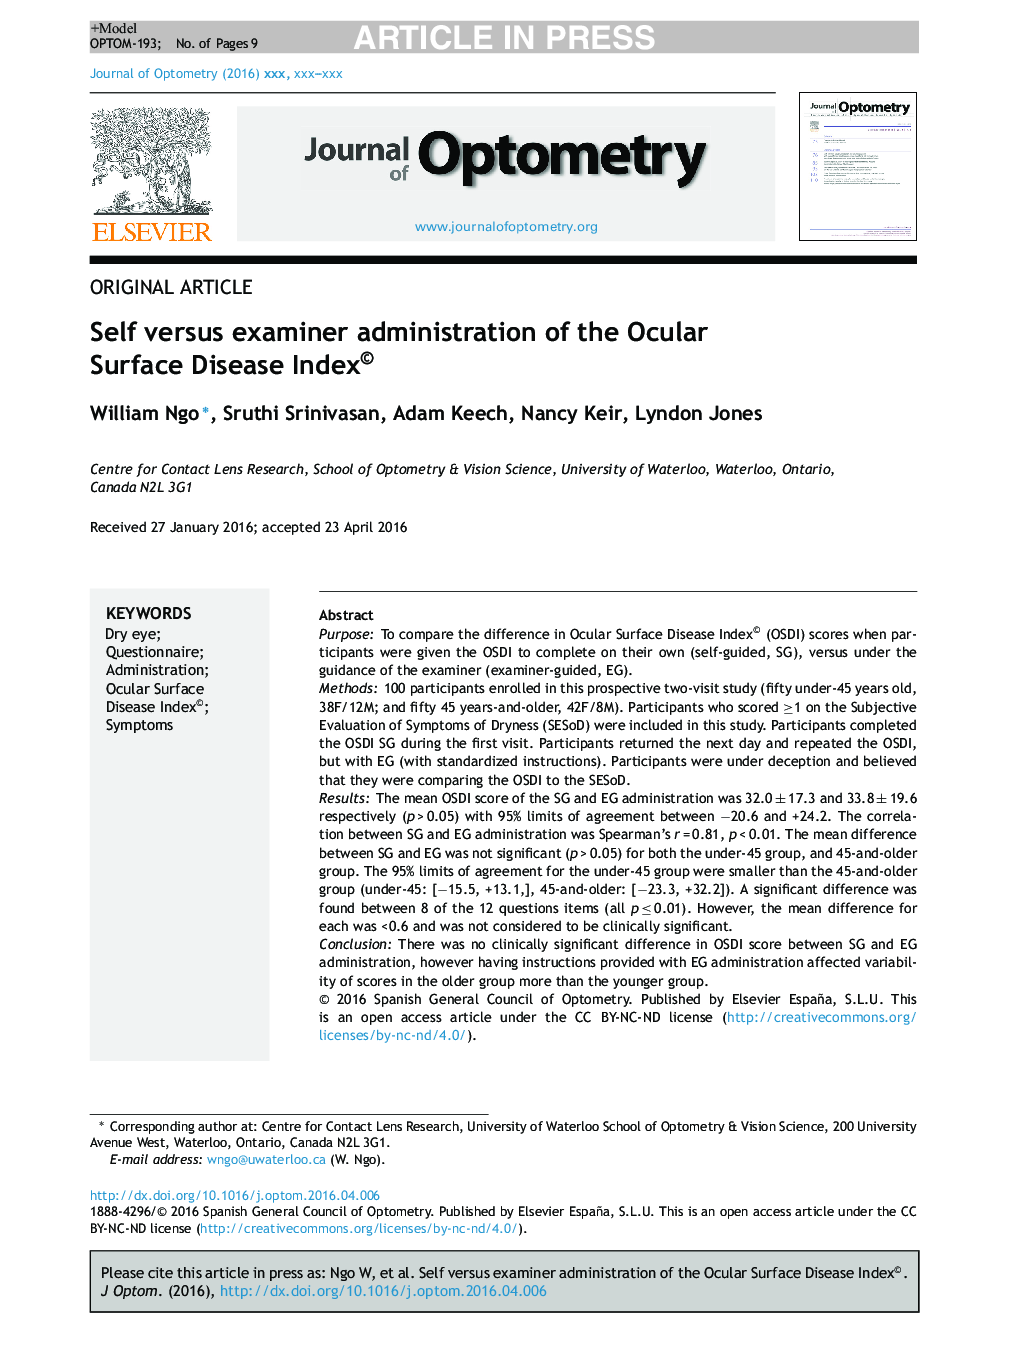 Self versus examiner administration of the Ocular Surface Disease Index©